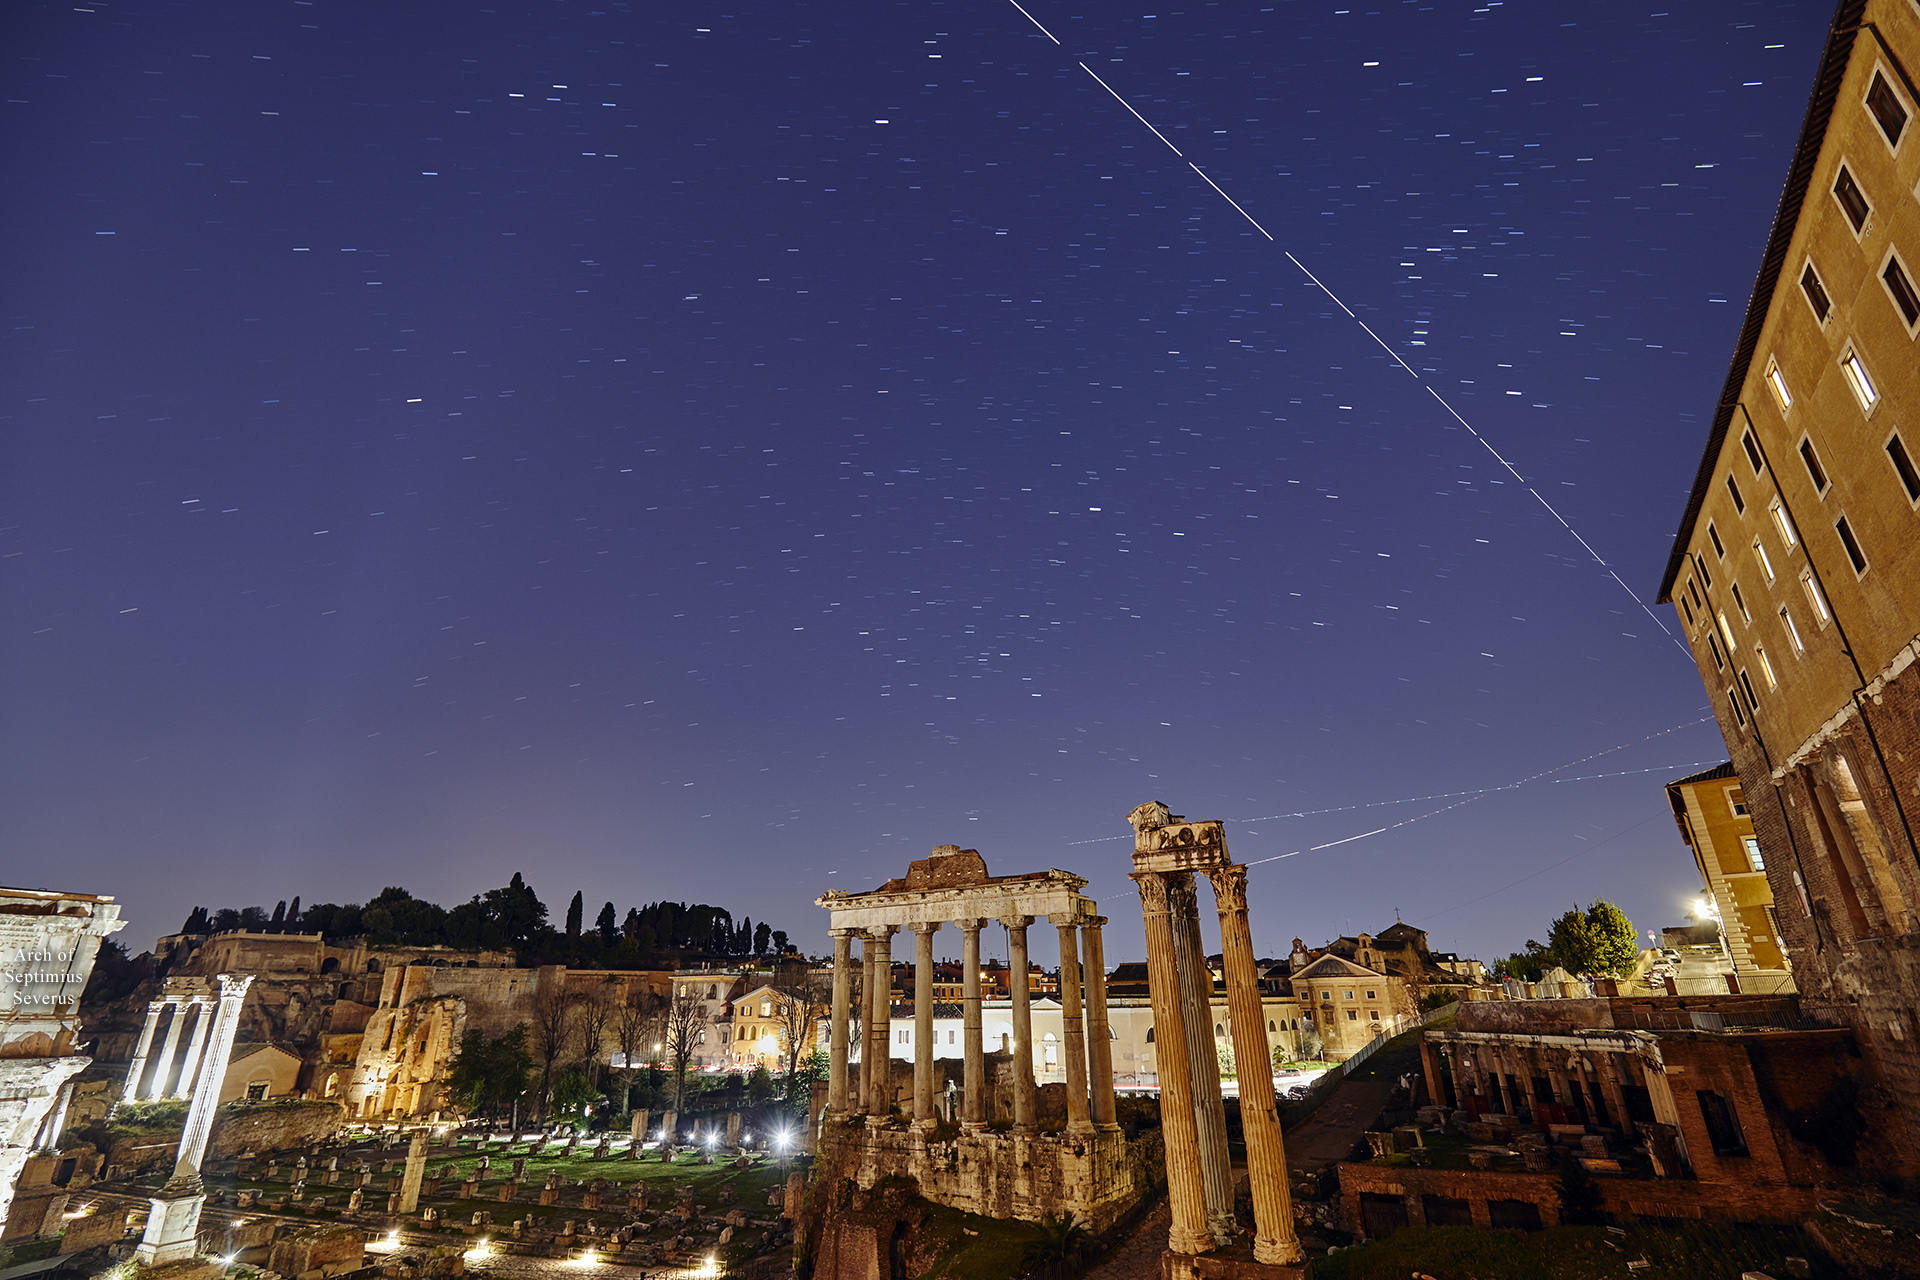 The International Space Station crosses the sky above the Roman Forum - 22 Mar. 2019